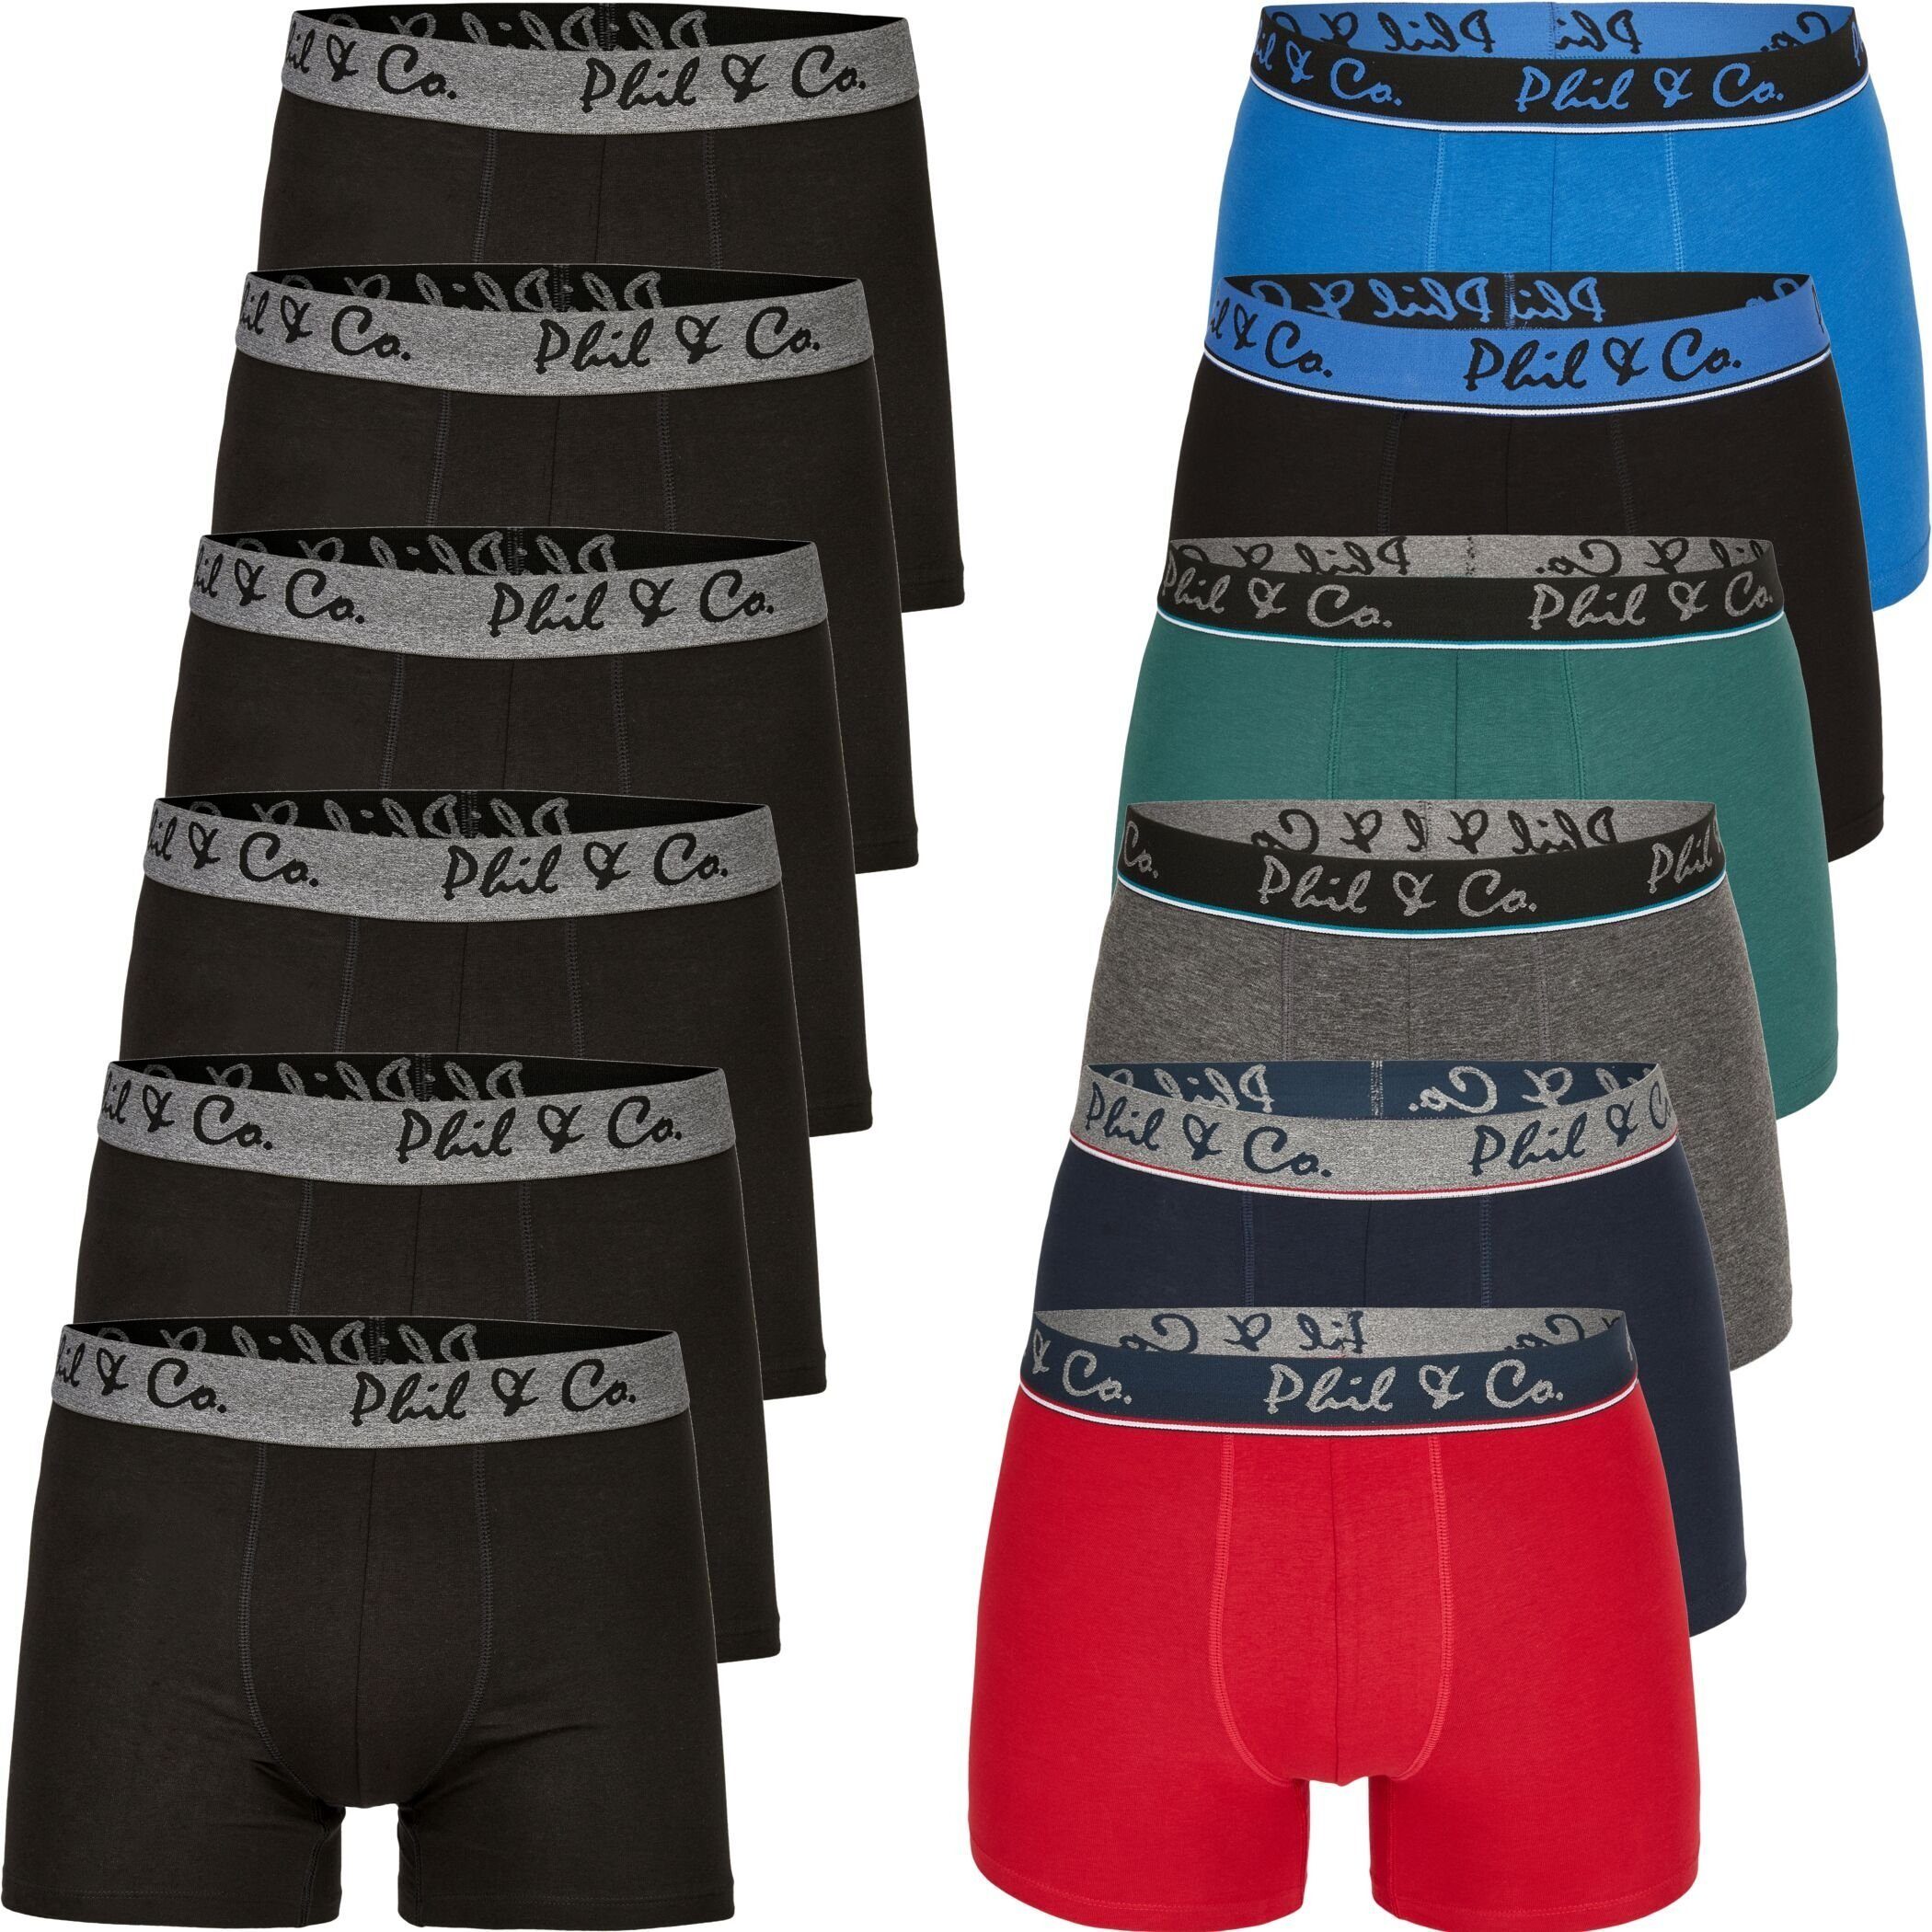 Co. Pack Boxershorts Phil Co (1-St) & Trunk Boxershorts Jersey Berlin Phil & FARBWAHL 04 Short Pant DESIGN 12